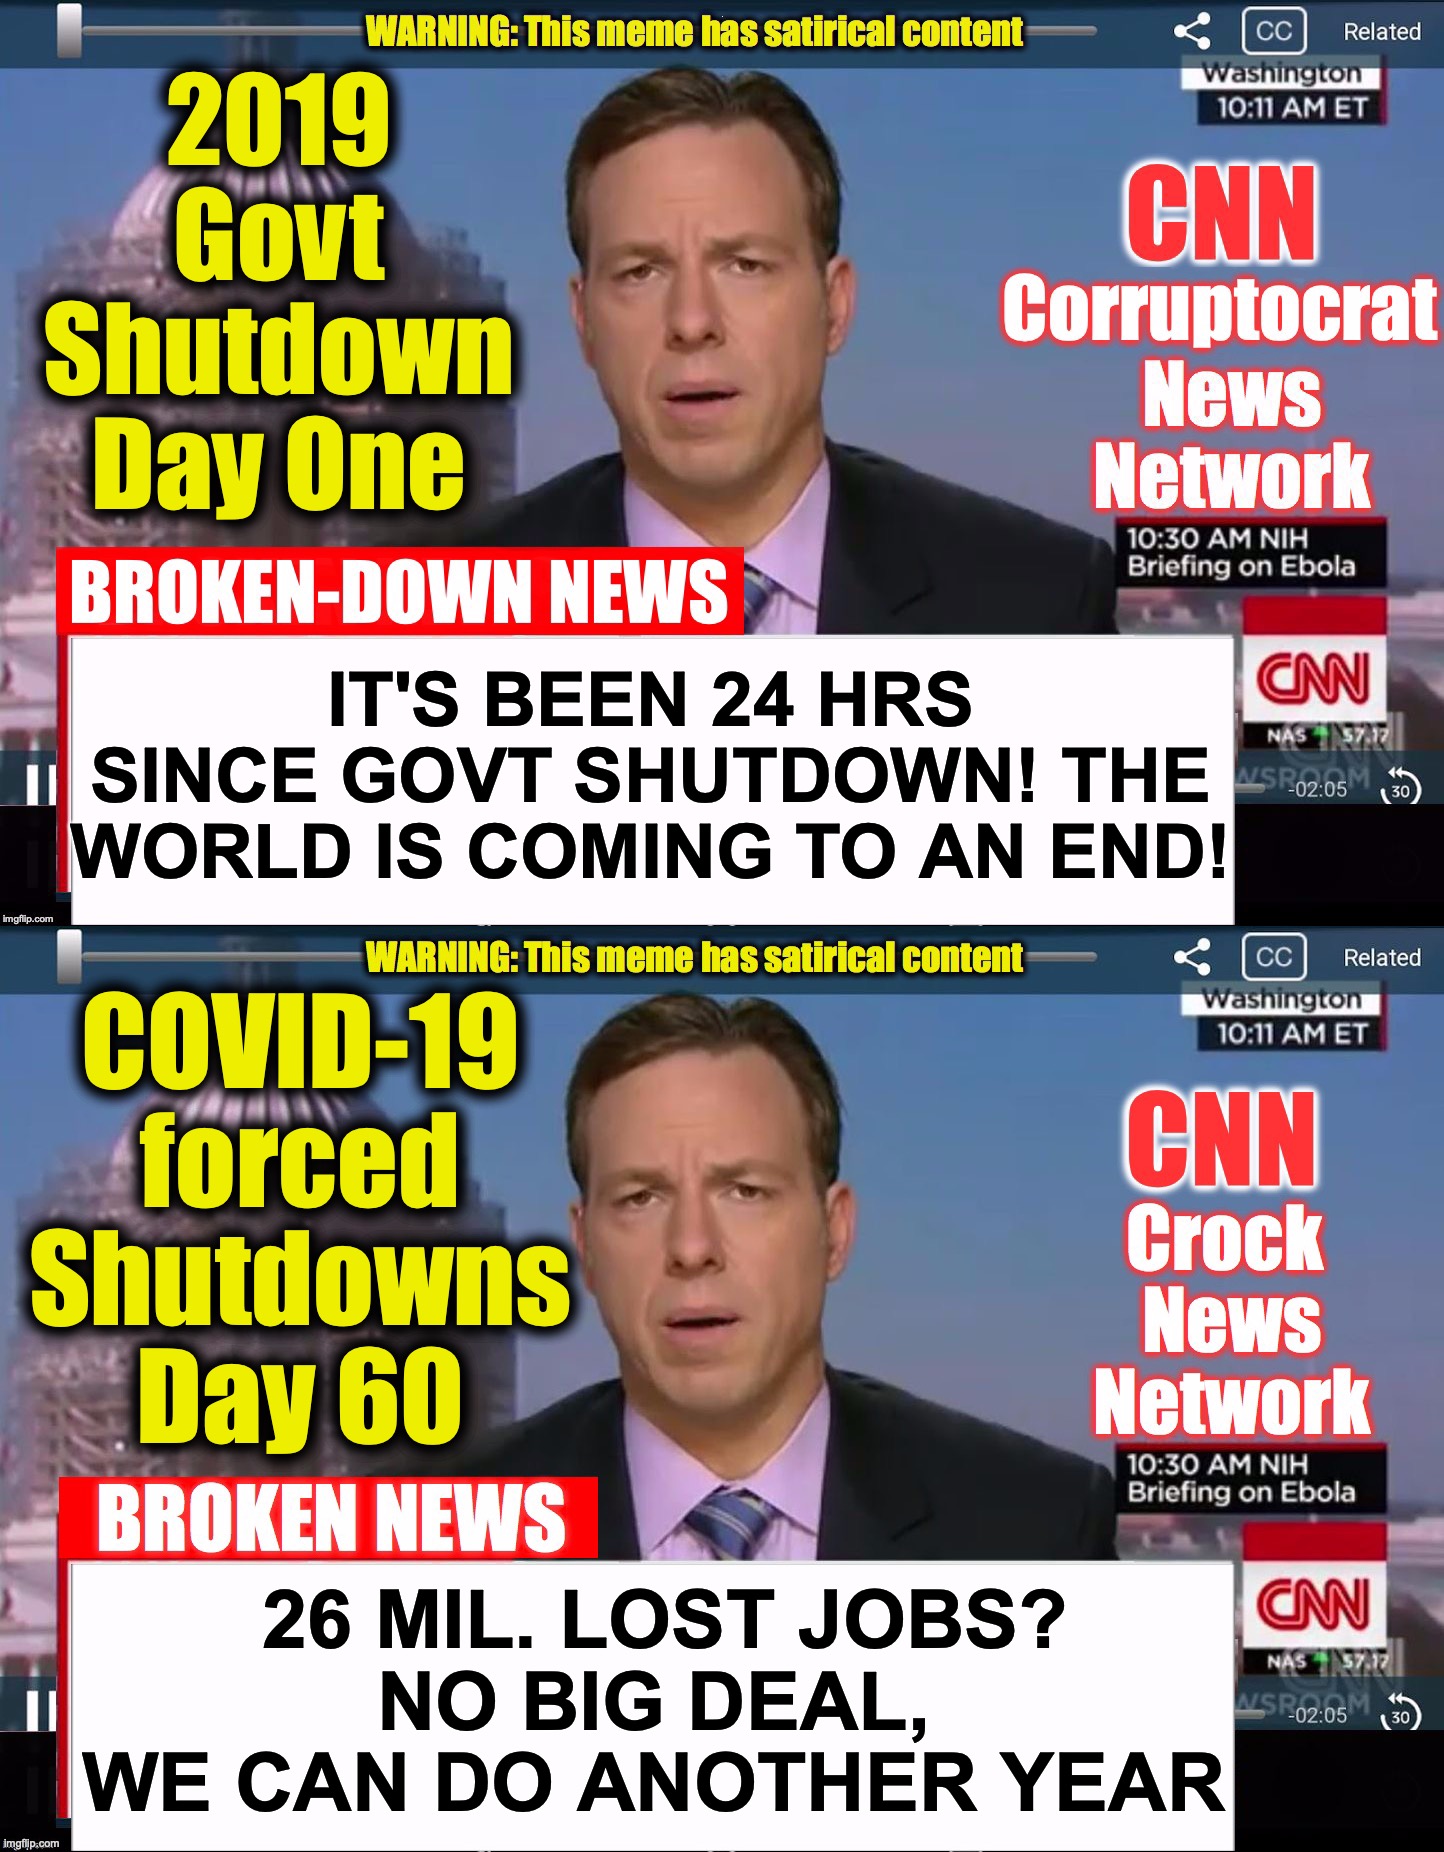 2019 Govt Shutdown Day One; IT'S BEEN 24 HRS SINCE GOVT SHUTDOWN! THE WORLD IS COMING TO AN END! COVID-19 forced Shutdowns Day 60; 26 MIL. LOST JOBS?
NO BIG DEAL, WE CAN DO ANOTHER YEAR | image tagged in cnn crock news network,cnn corruptocrat news network,covid-19,coronavirus | made w/ Imgflip meme maker